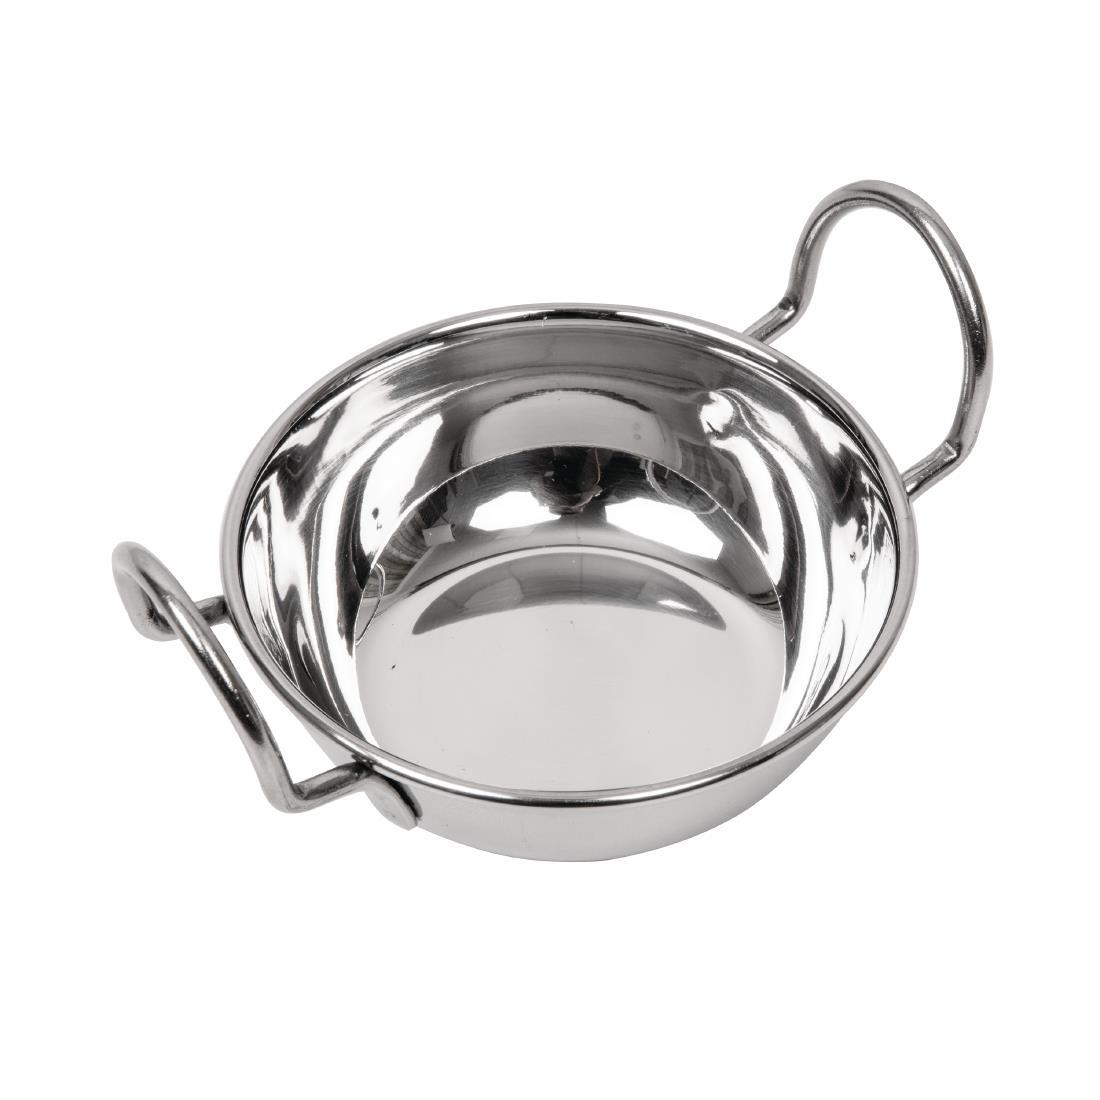 Balti Dipping Dish with Handles 100mm - CK580  - 2